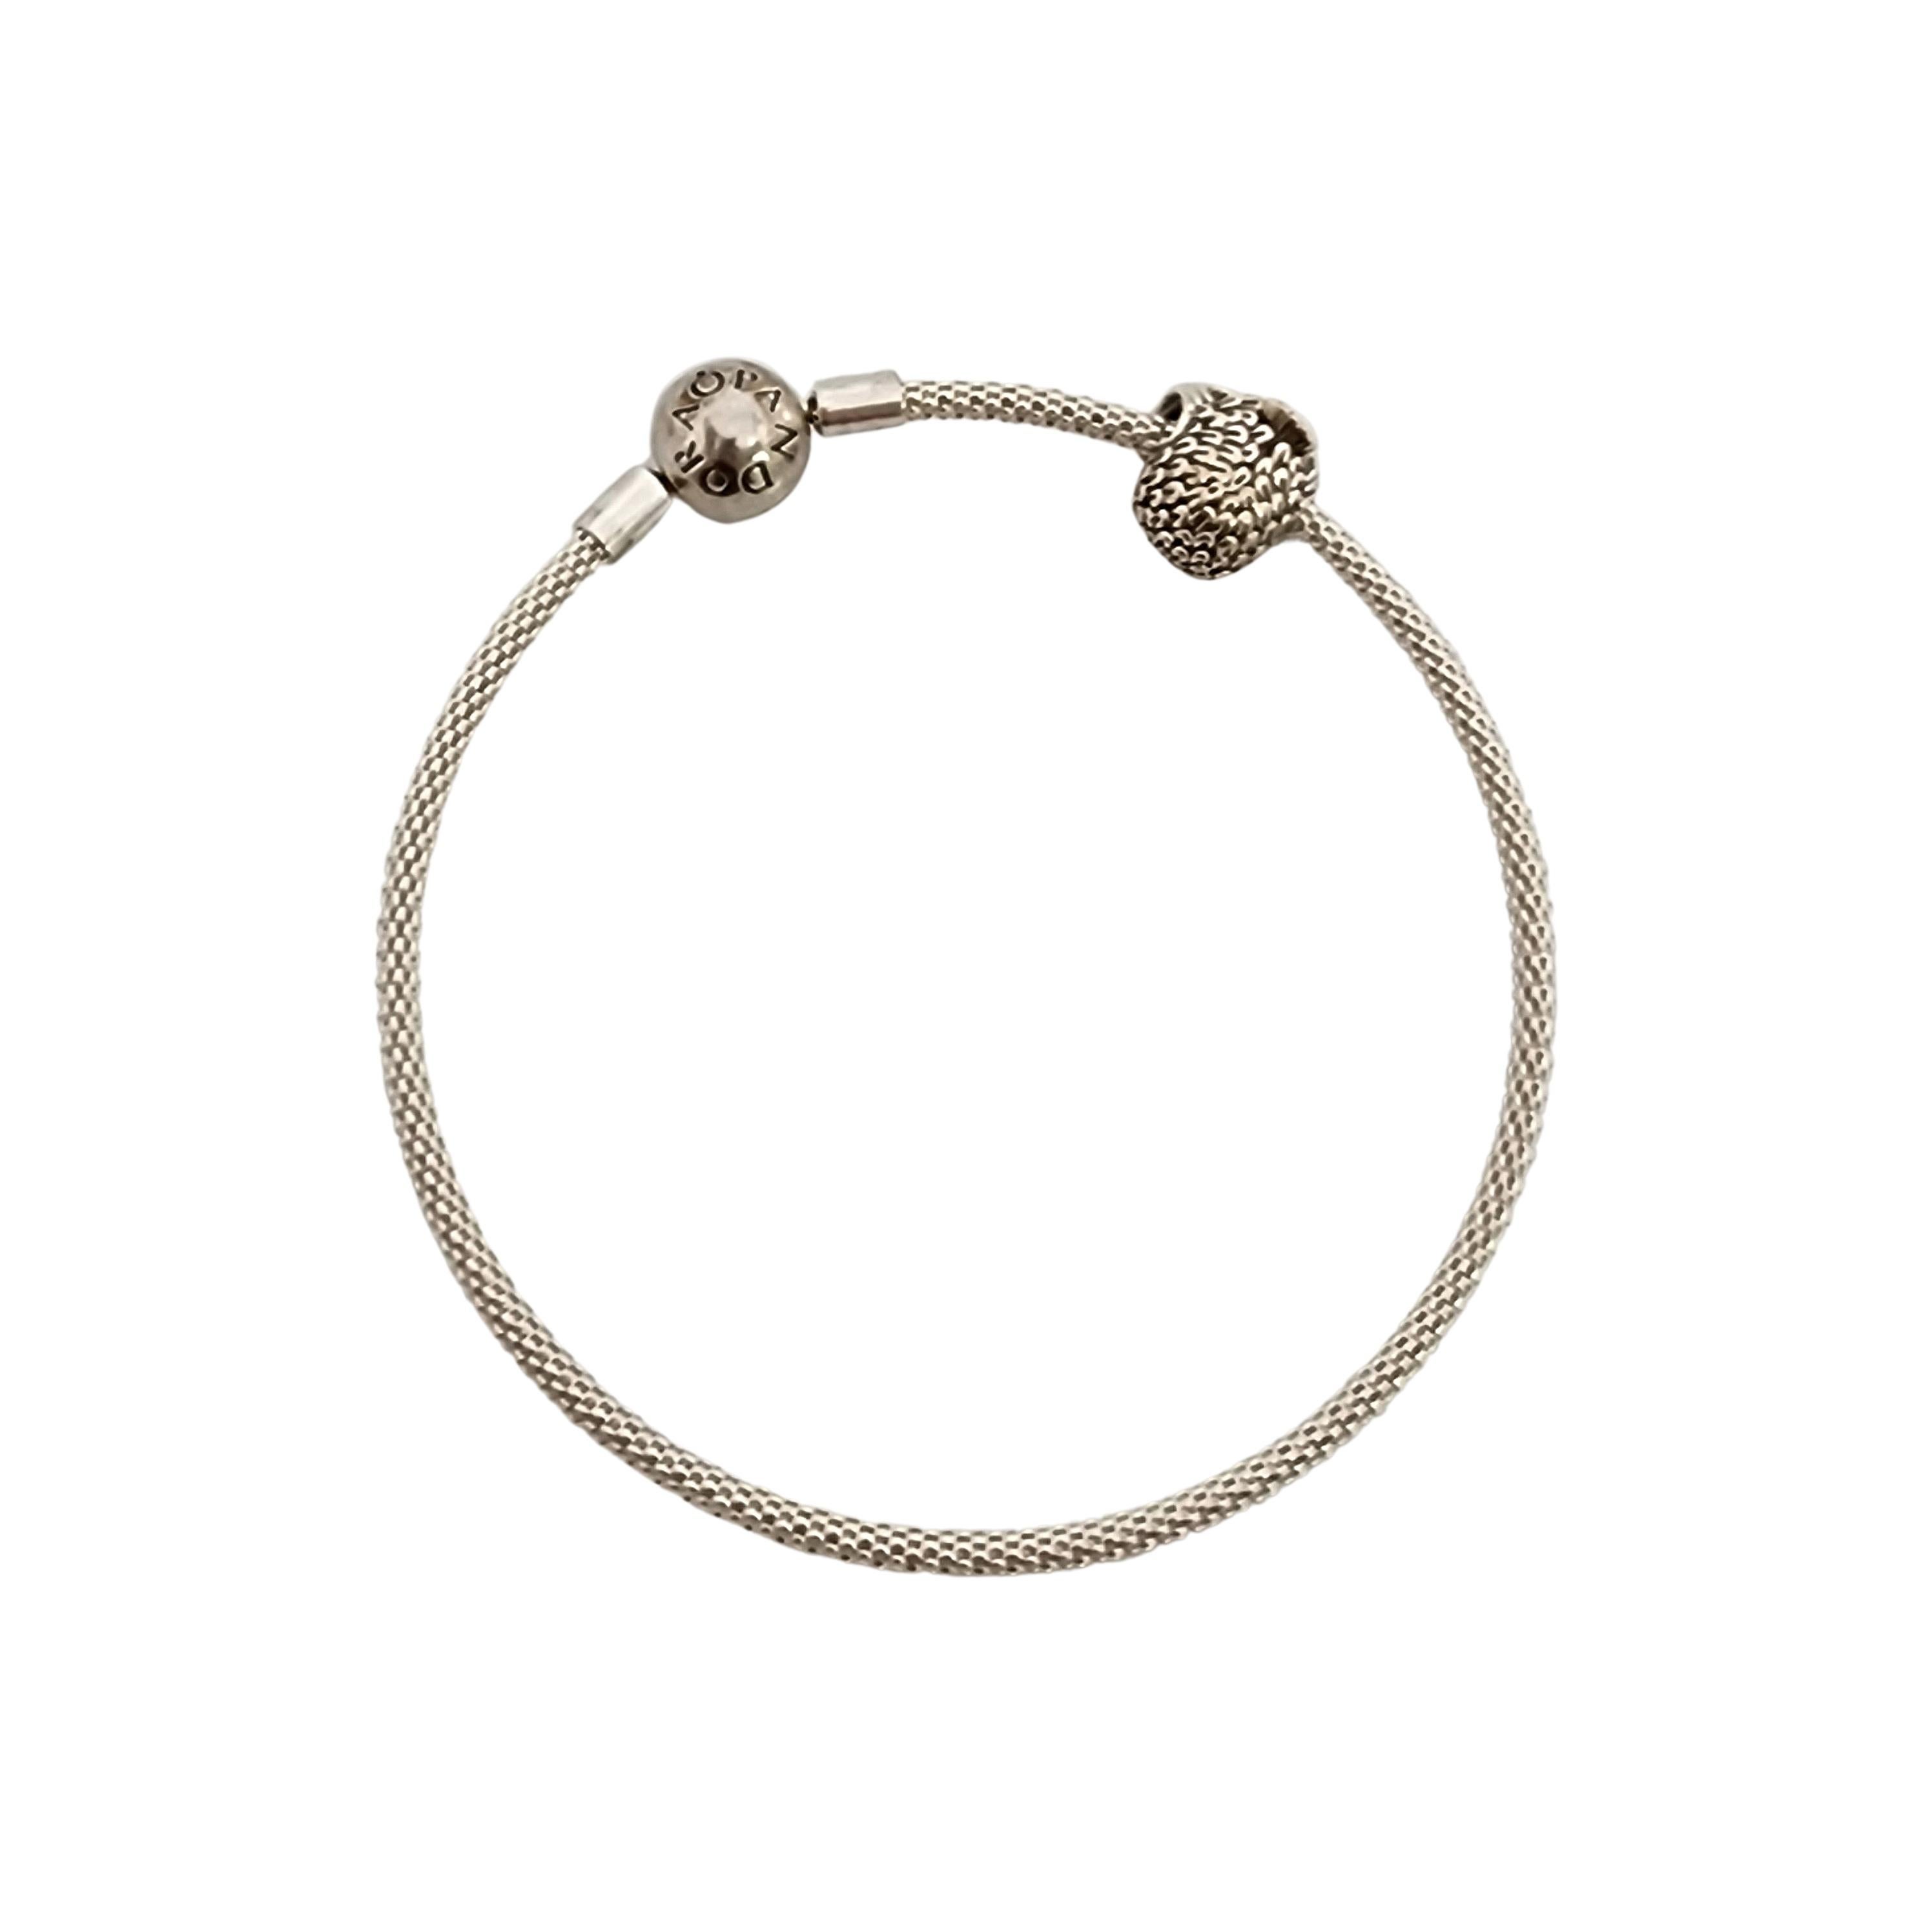 Authentic Pandora Moments sterling silver mesh bangle bracelet with Mother Baby Owl charm.

Bracelet #596543

Charm #791966

Pandora's mesh bracelet features a round clasp, includes an authentic charm featuring a baby owl nestled into the mother